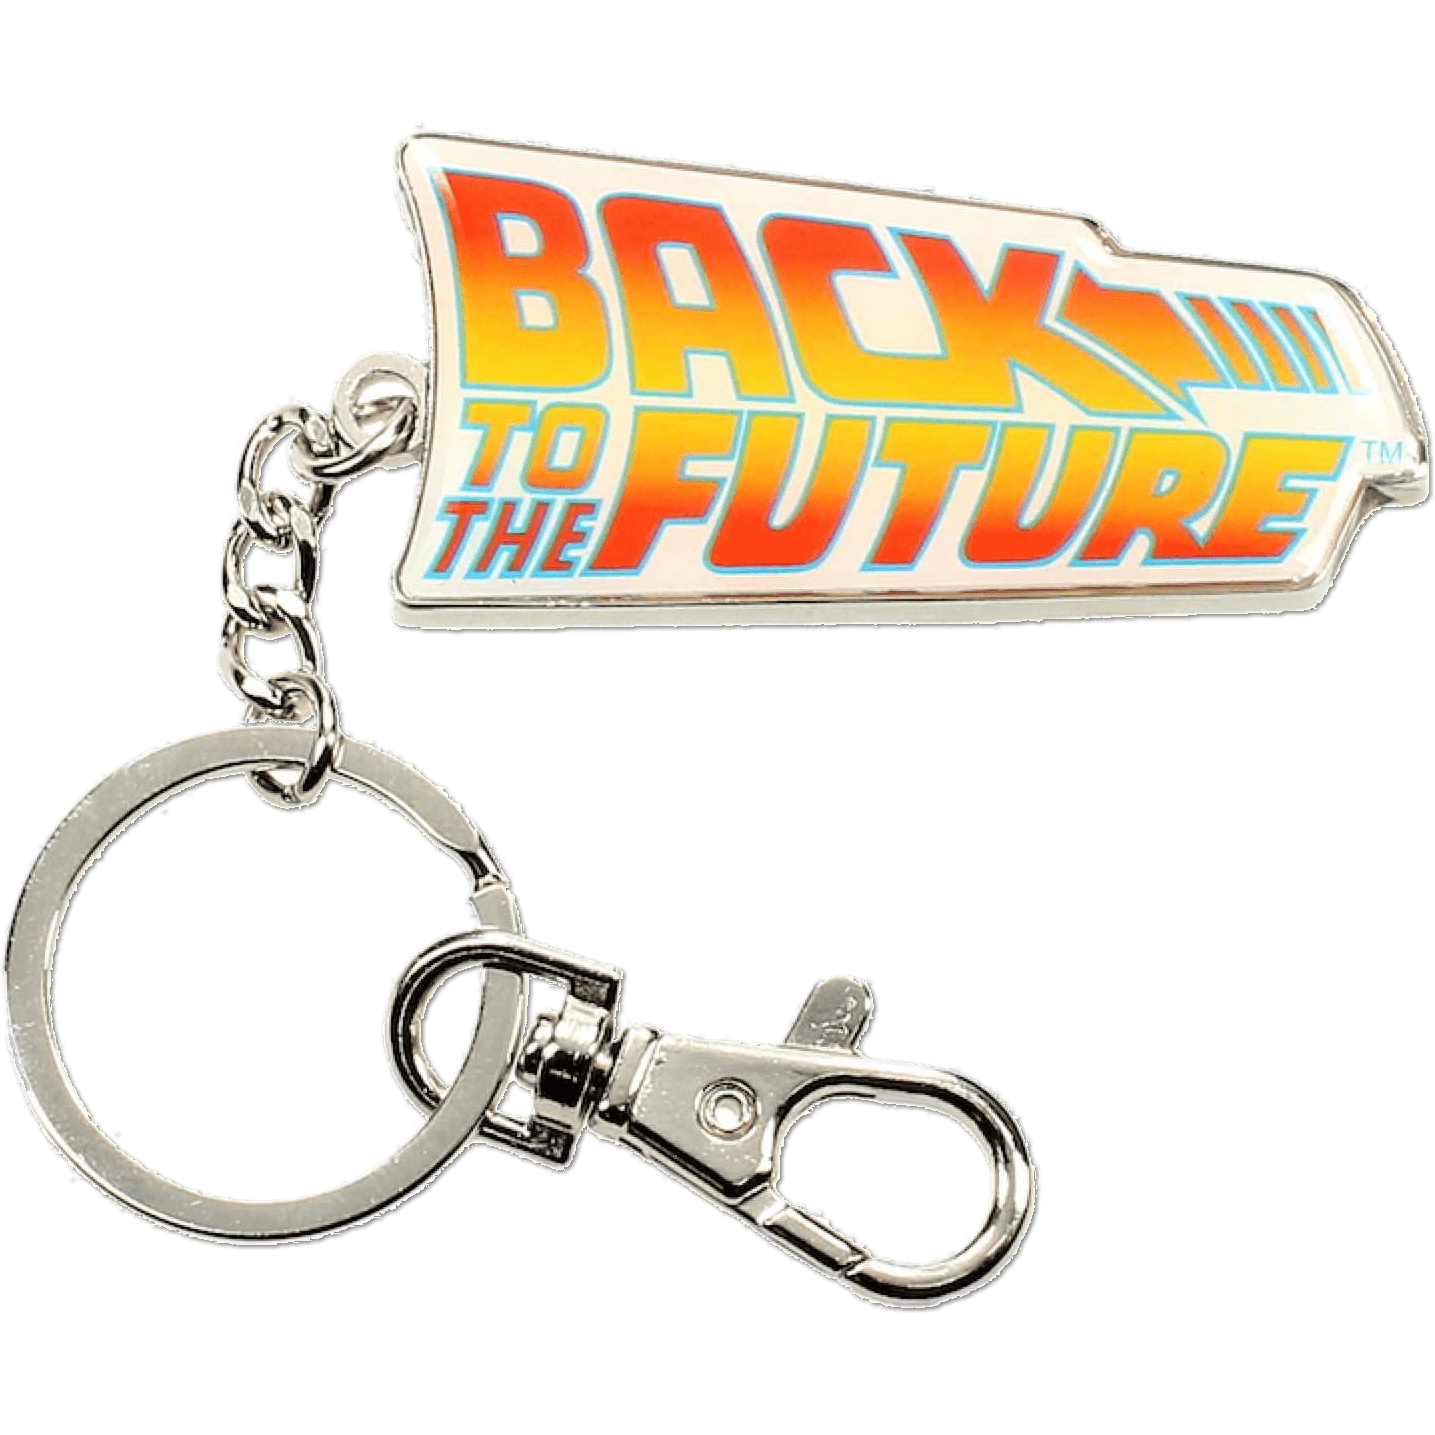 Back to the Future Movie Logo Metal Key Ring Keychain SD Toys